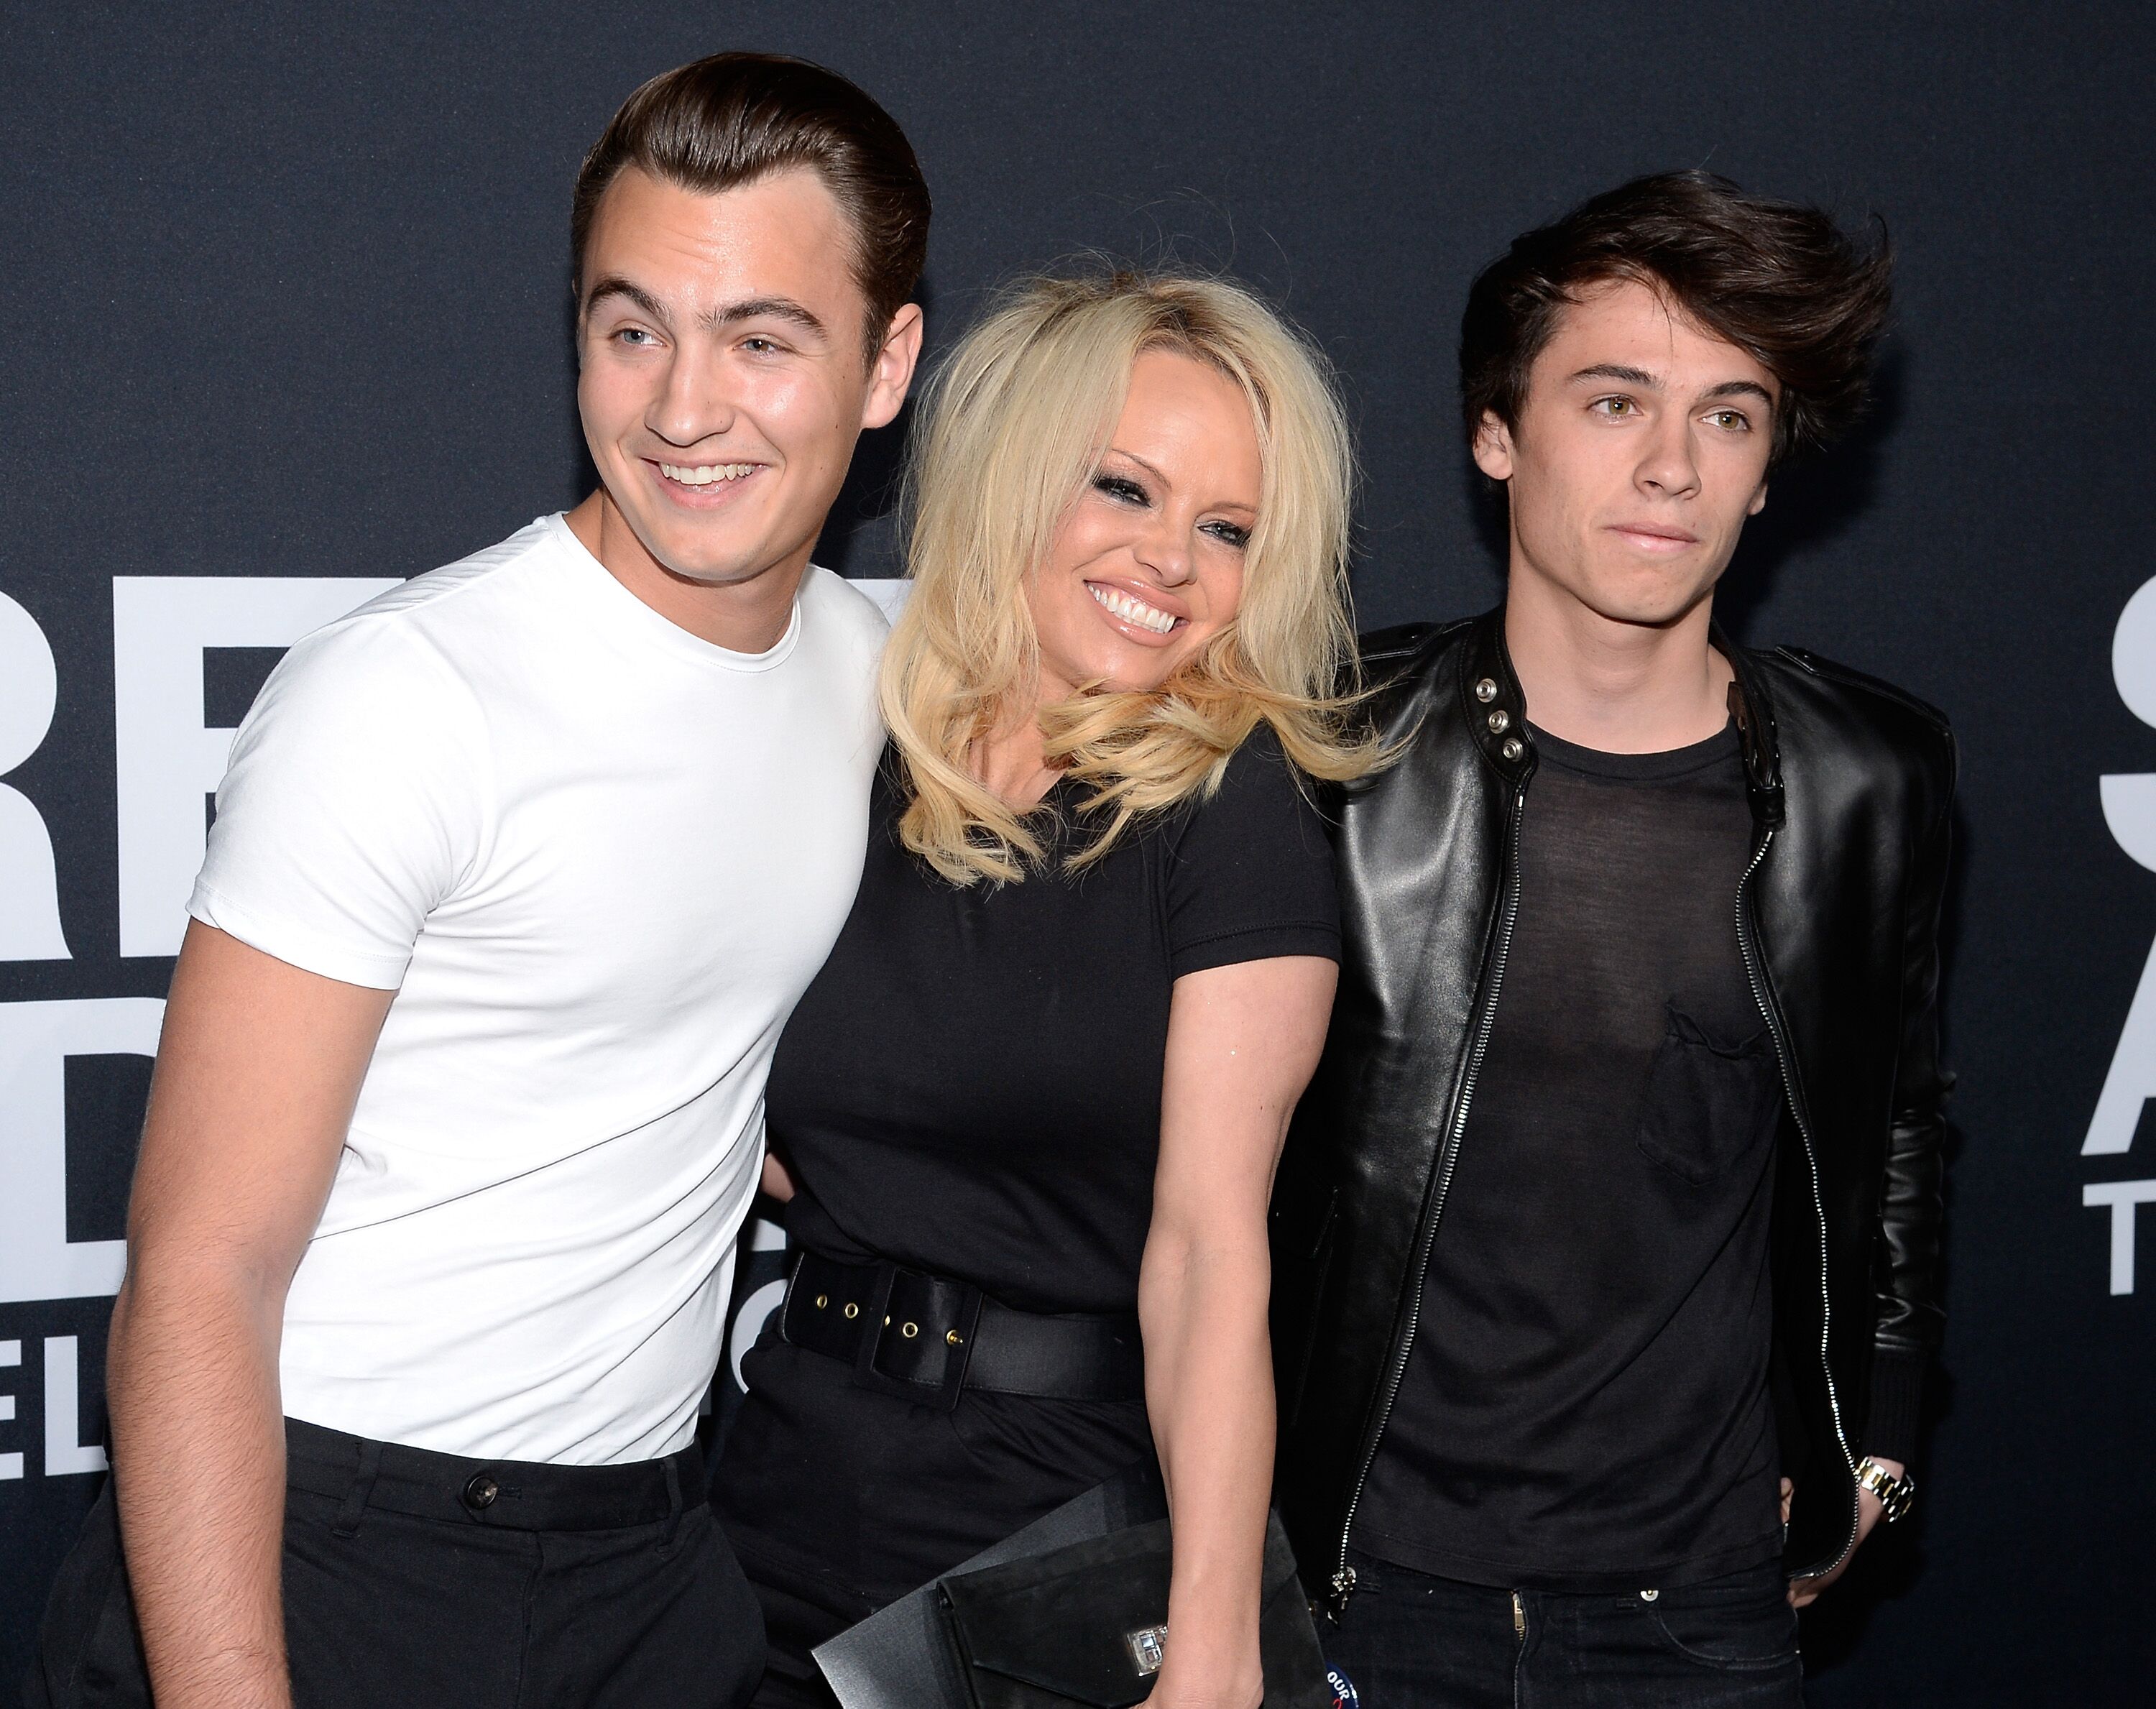 Pamela Anderson and her sons Brandon and Dylan Lee at the Saint Laurent show in Hollywood in 2016 | Source: Getty Images